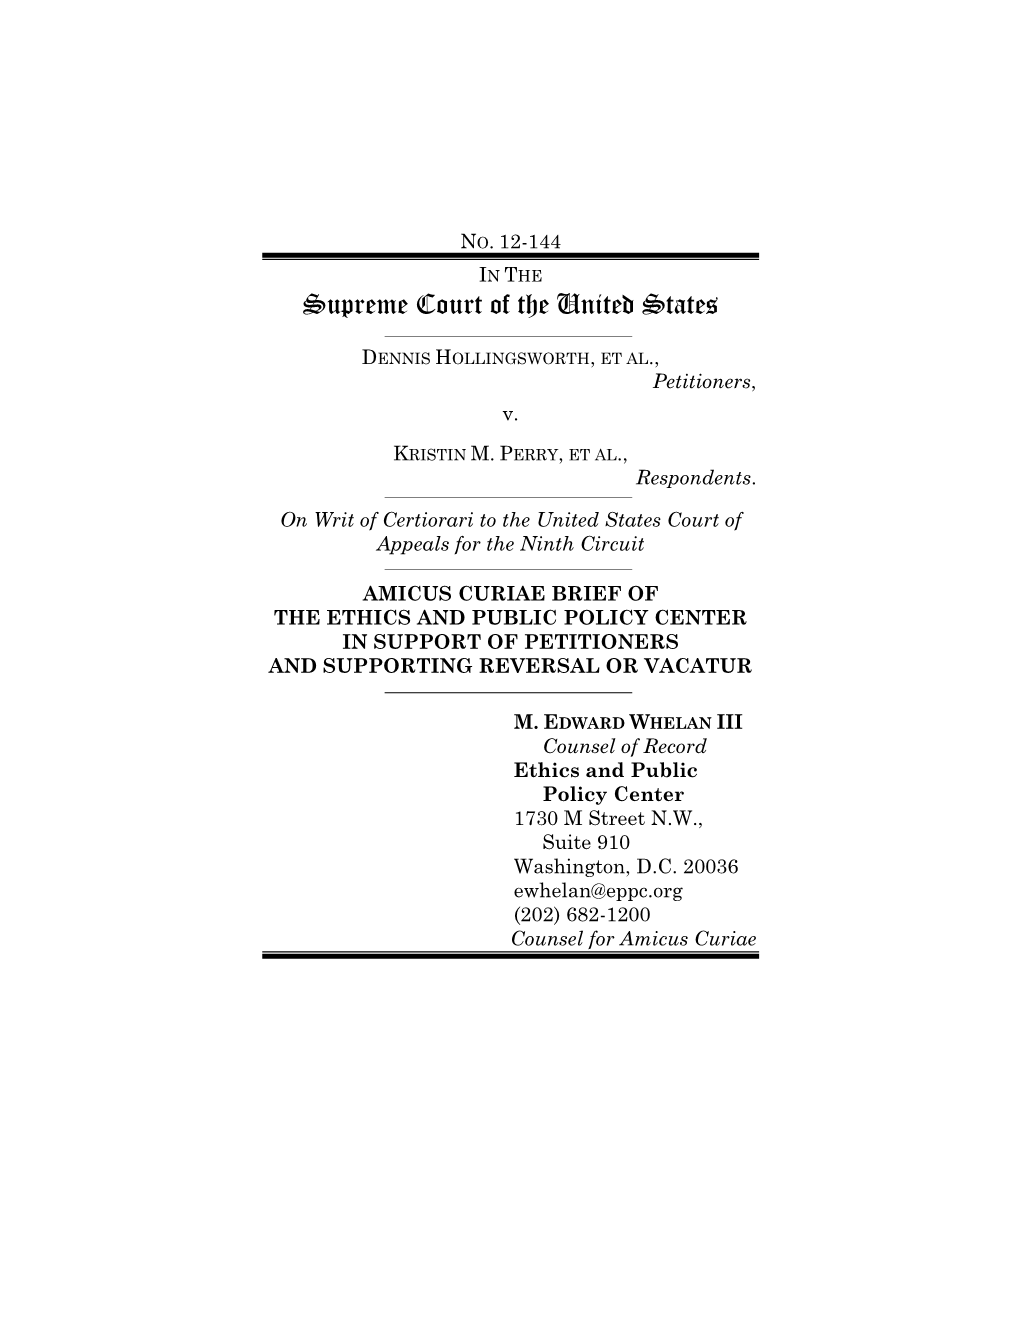 Amicus Briefs, and Their Consents Are on File with the Clerk of the Court